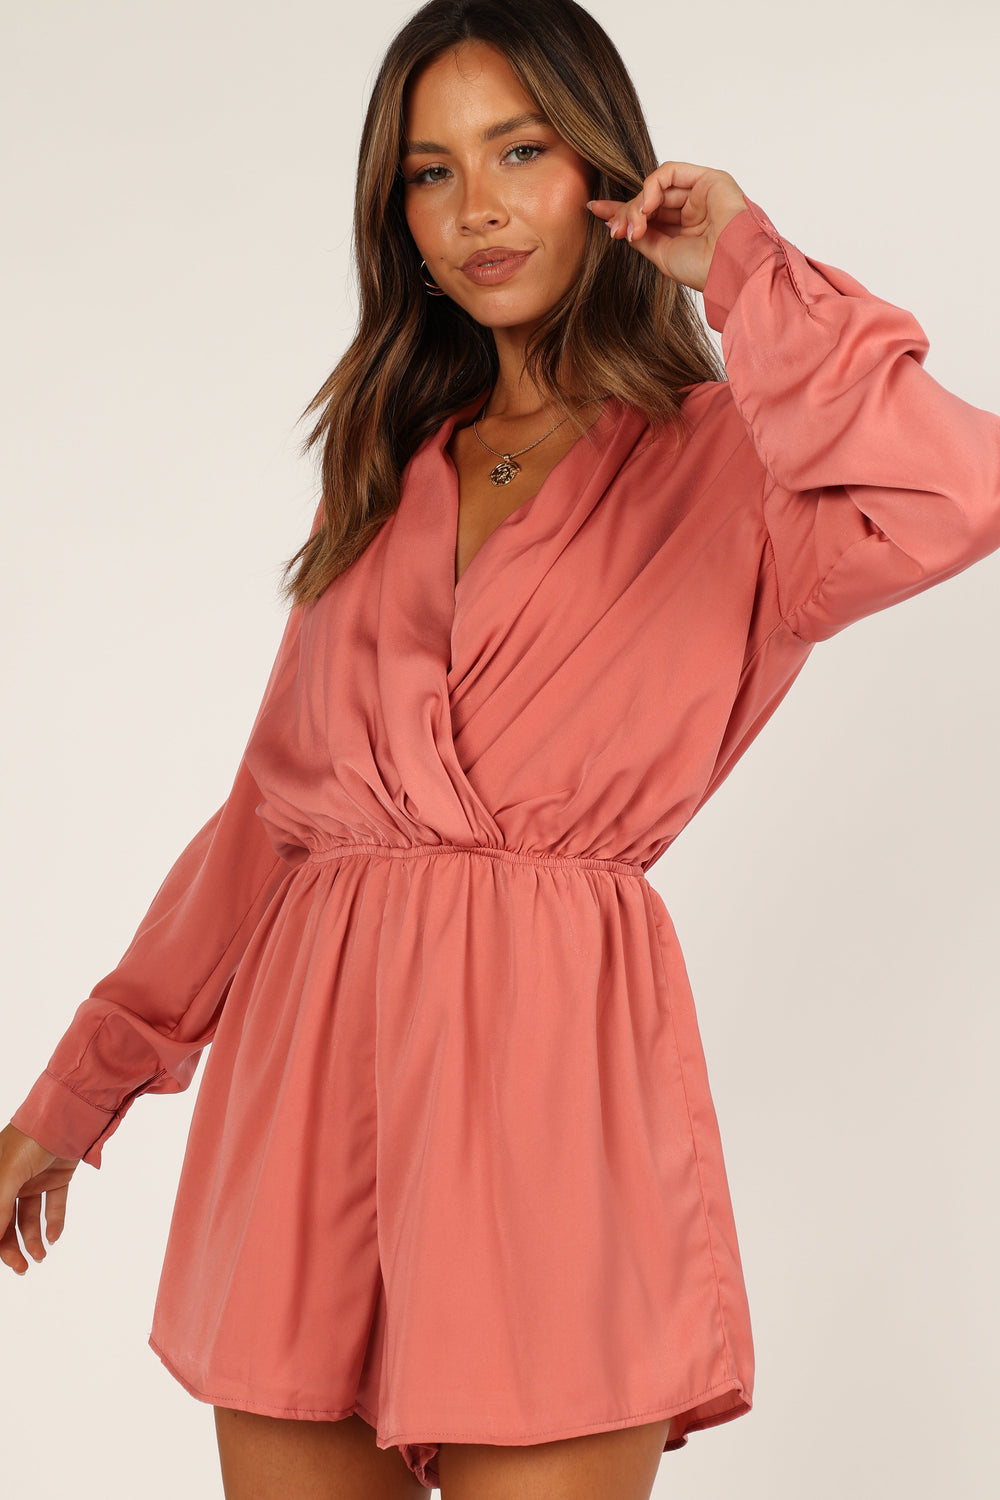 PLAYSUITS Tangle Long Sleeve Playsuit - Rose